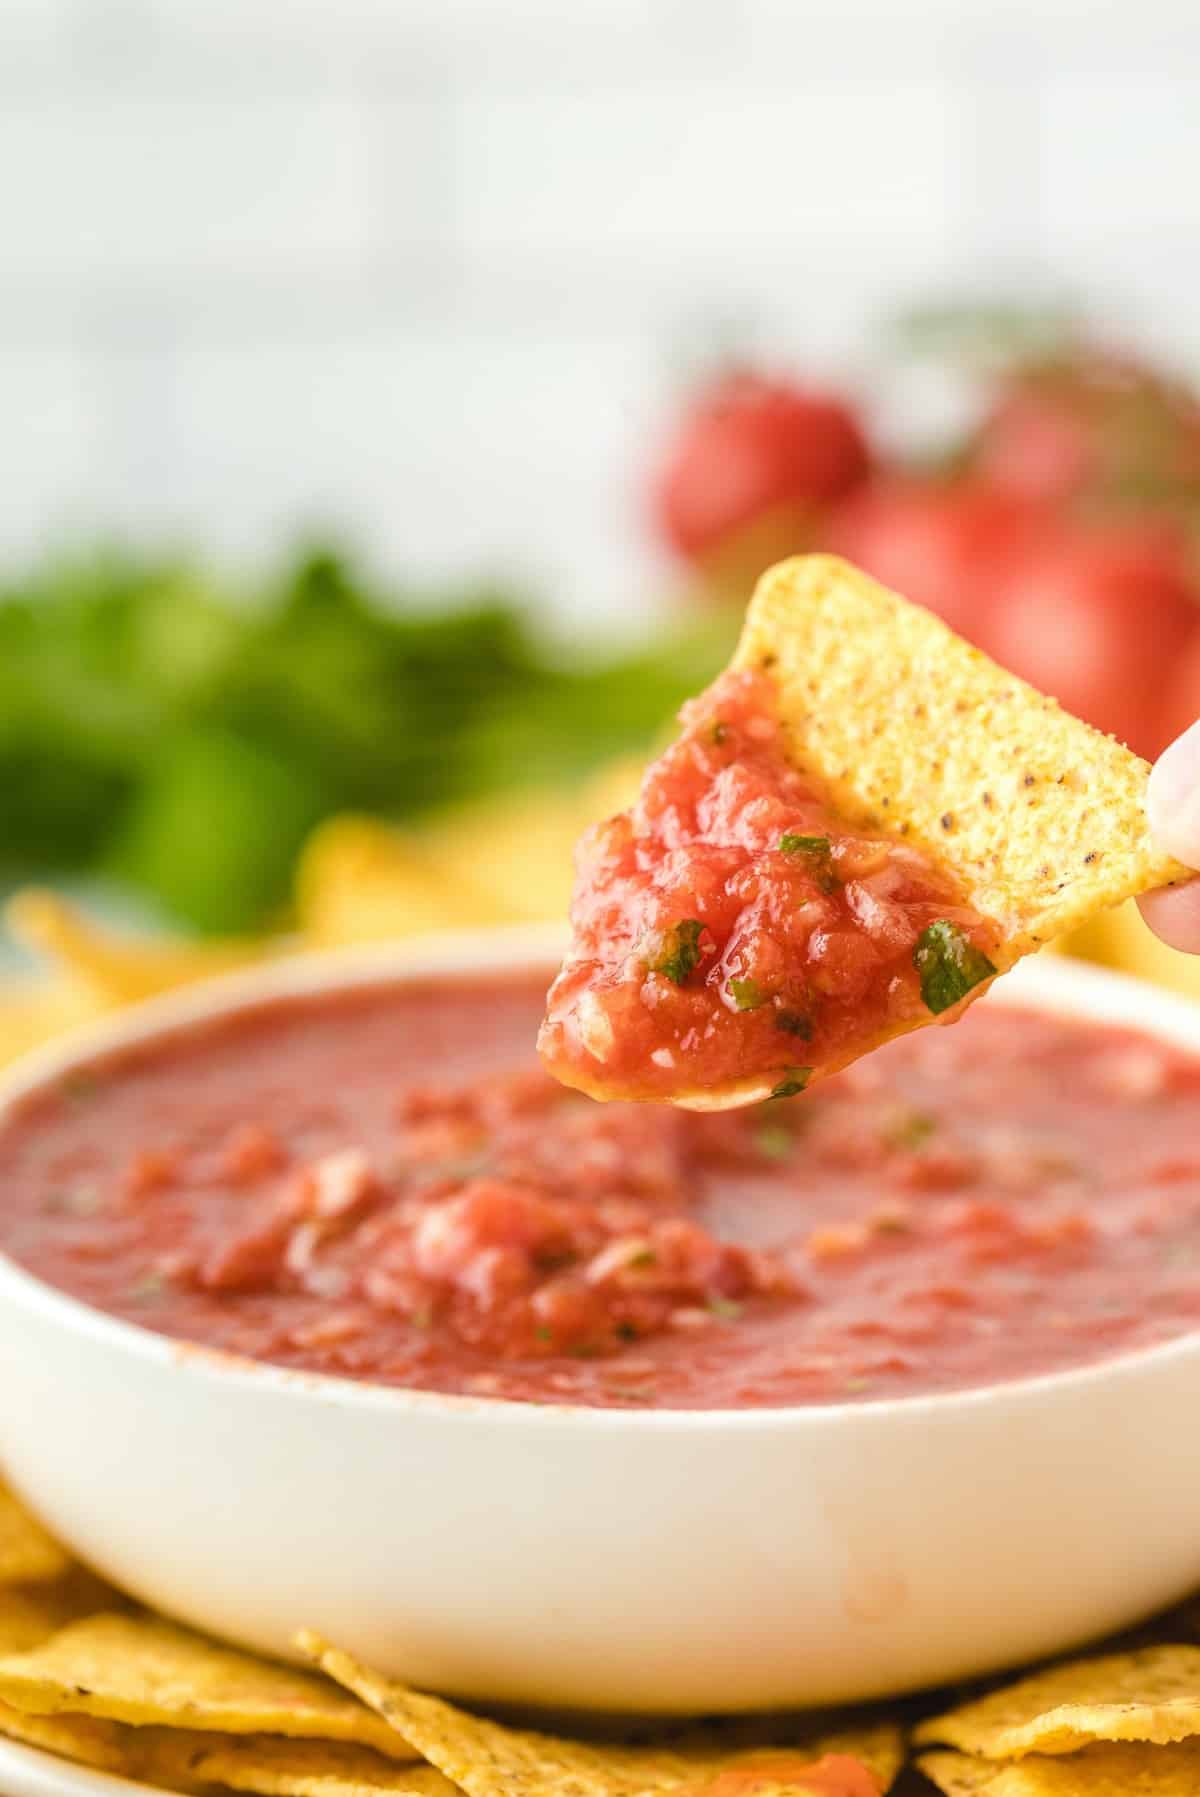 tortilla chips dipped in salsa